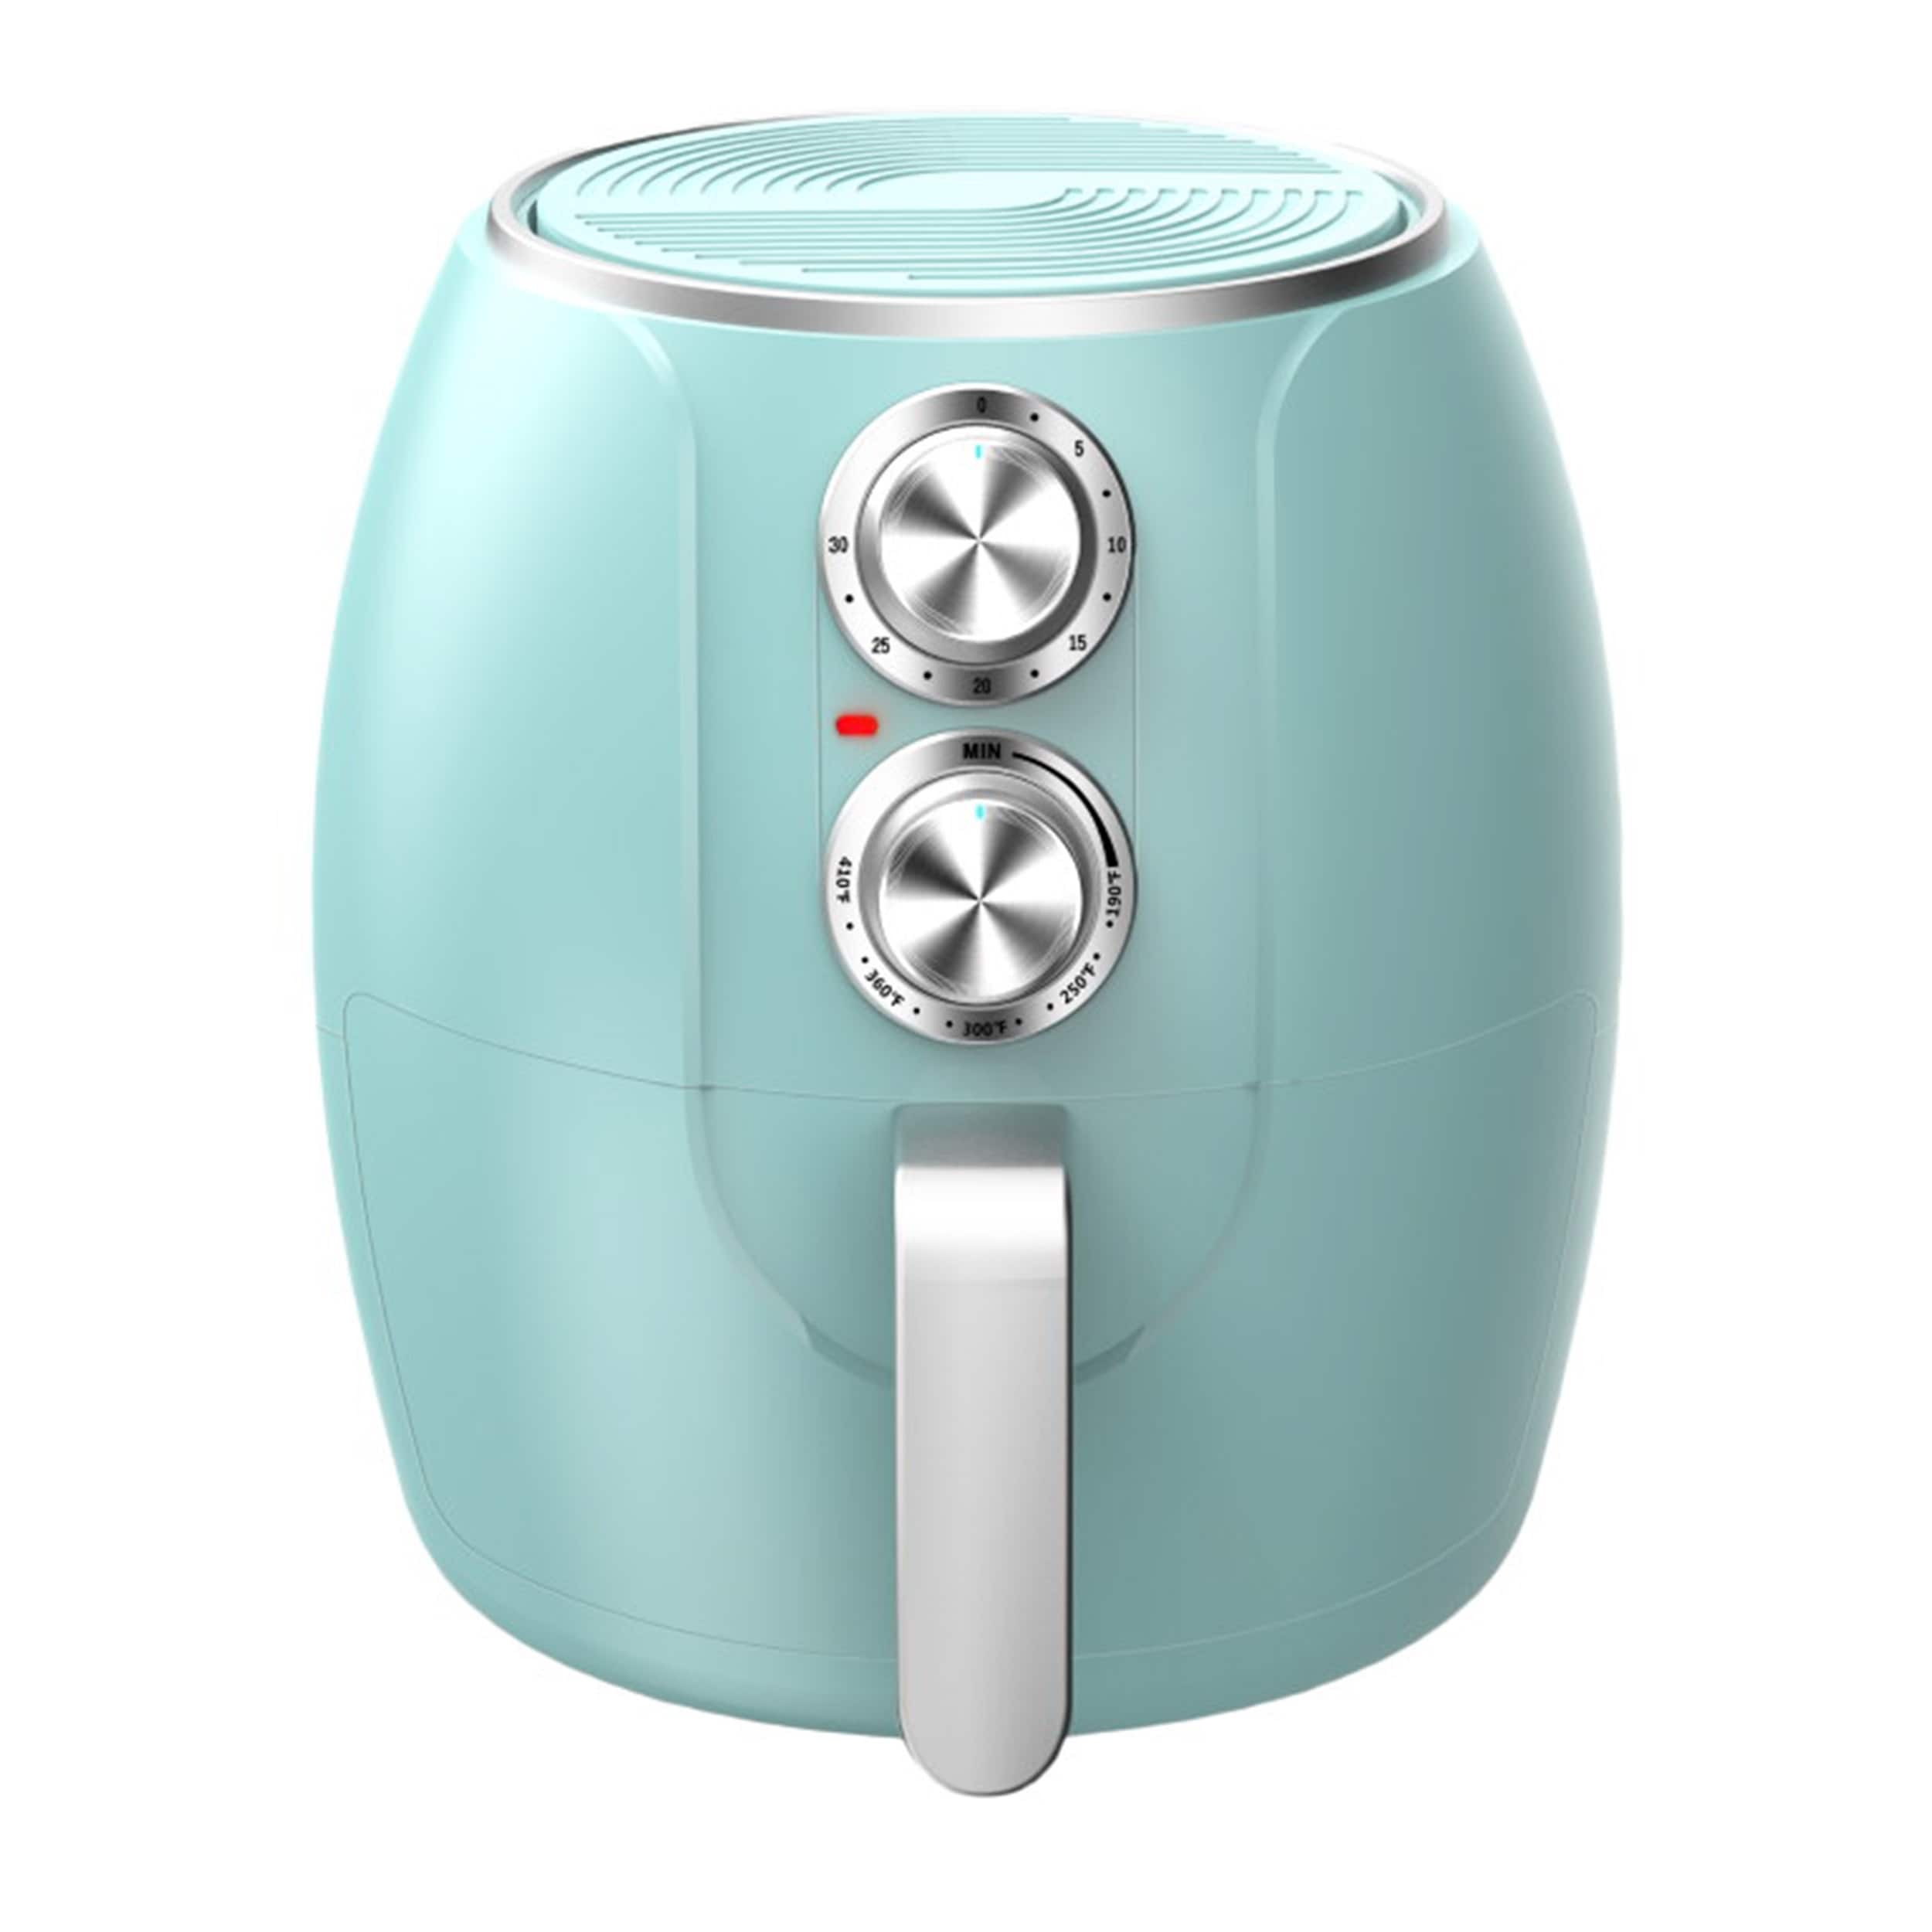 https://ak1.ostkcdn.com/images/products/is/images/direct/12da216bac3ef4628ae3d7e1a73ad1f0a3ba3340/Brentwood-3.2-Quart-Electric-Air-Fryer-in-Turquoise.jpg